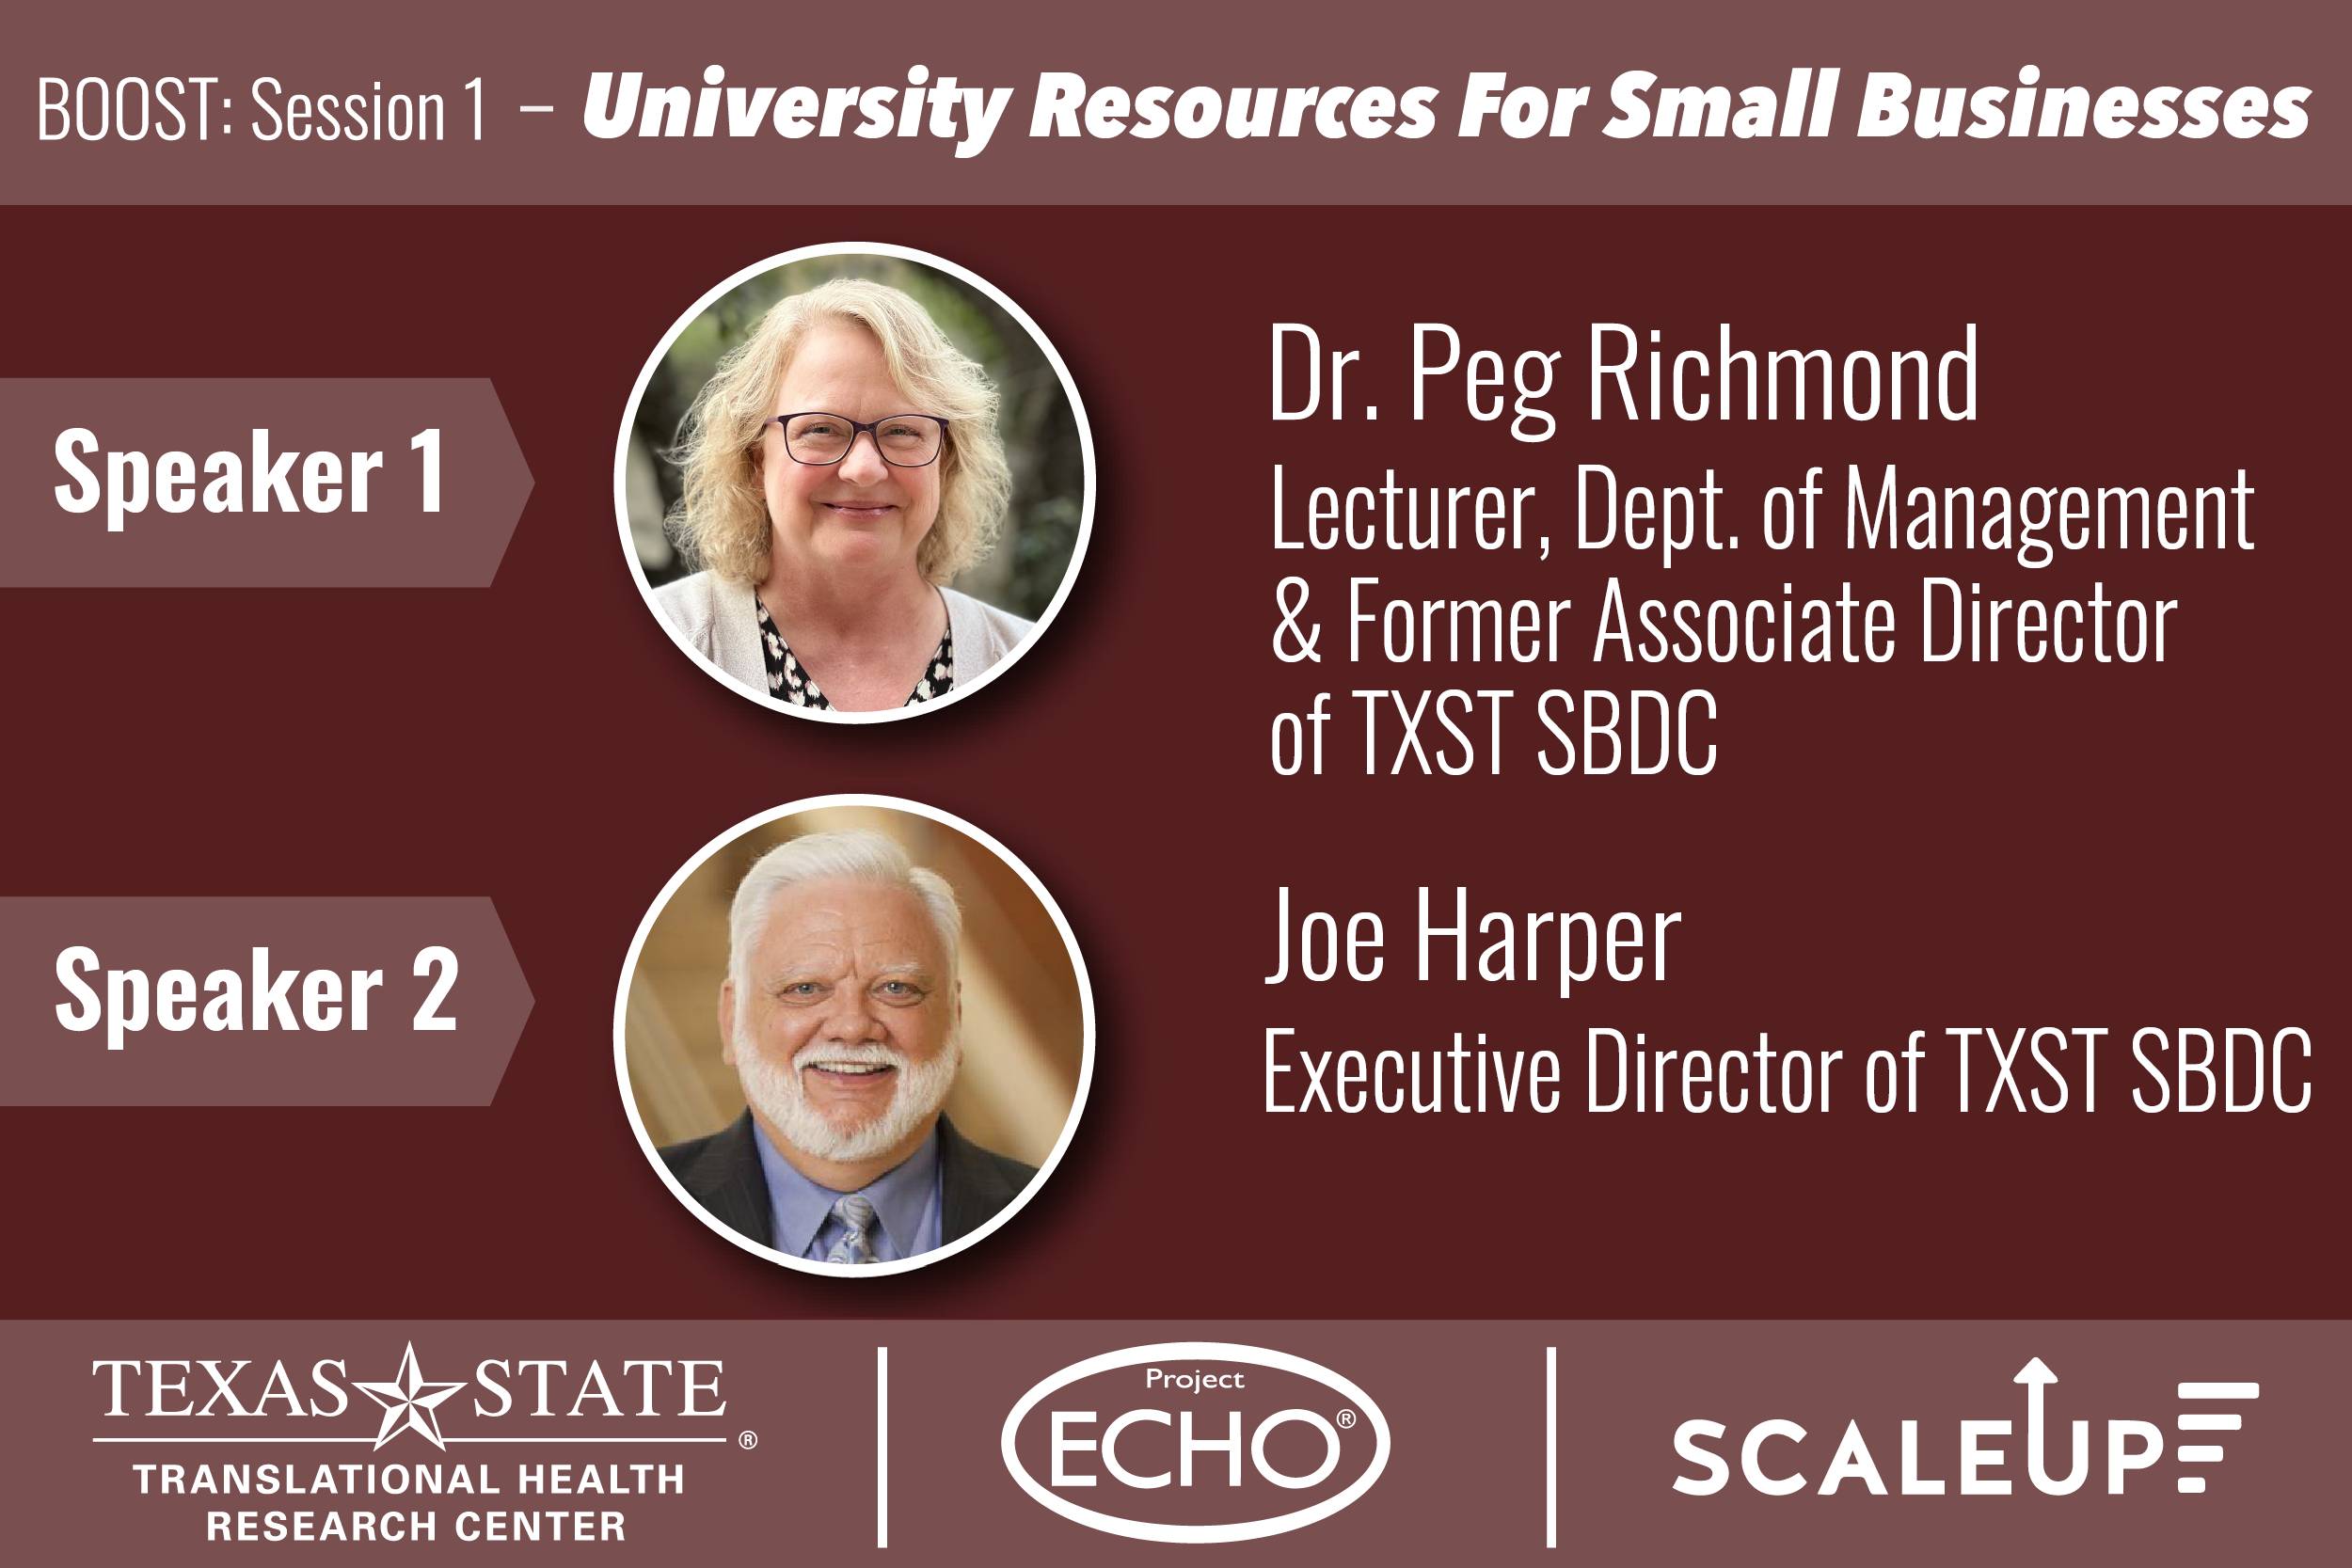 Headshot of Dr. Peg Richmond Joe Harper and with the title "BOOST: Session 1- University Resources for Small Businesses. Speaker 1 is Dr. Peg Richmond, Lecturer, Dept. of Management & Former Associate Director of TXST SBDC. Speaker 2 is Joe Harper, Executive Director of TXST SBDC."